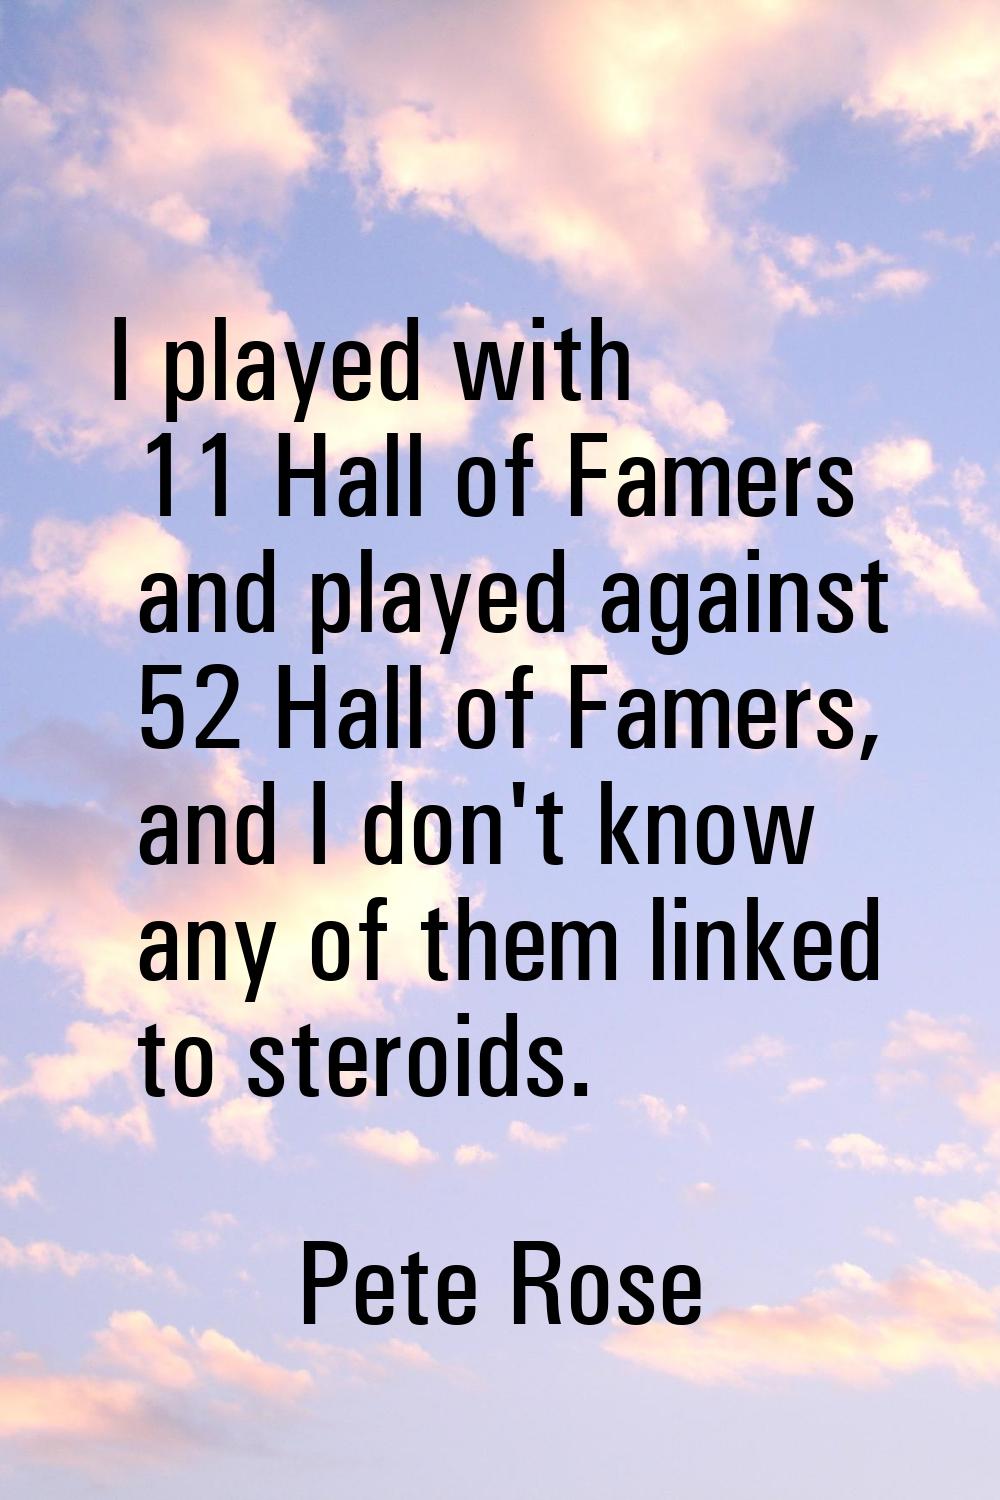 I played with 11 Hall of Famers and played against 52 Hall of Famers, and I don't know any of them 